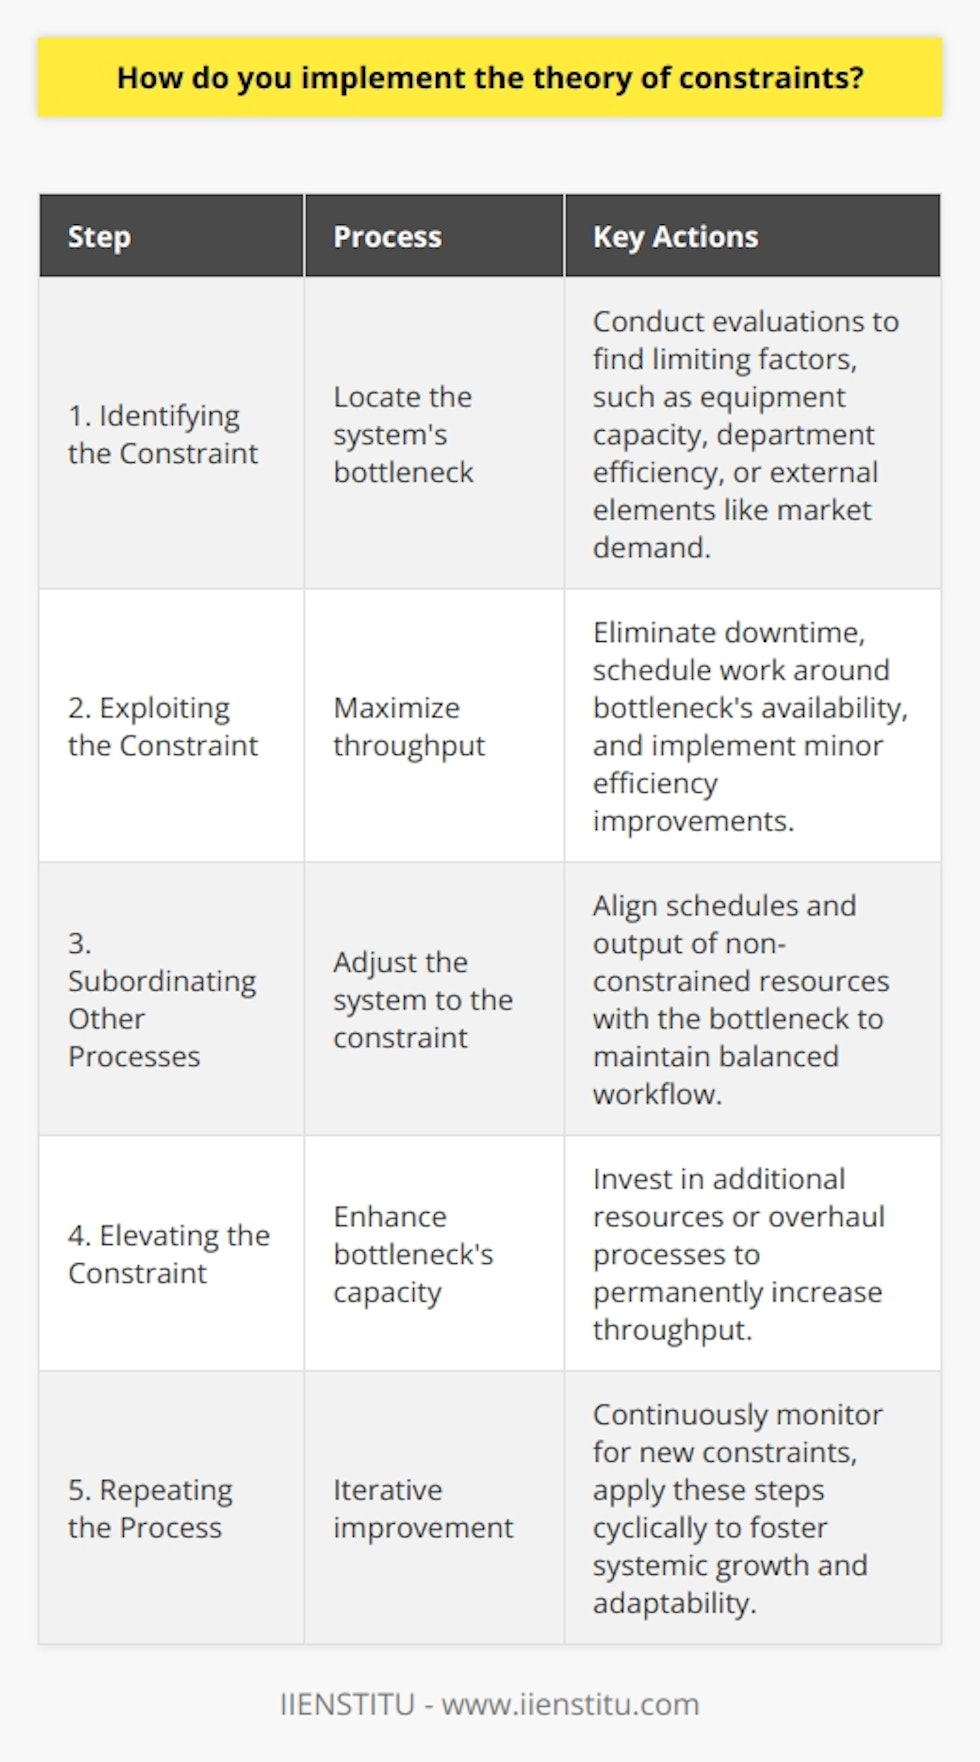 Implementing the Theory of Constraints (TOC) constitutes a strategic approach to enhancing organizational performance through the identification and management of limiting factors – or constraints – that impede the achievement of goals. Herein lies a structured overview of strategically applying TOC within an organization.Identifying the Constraint:Before anything else, it is imperative to discern the precise constraint that constricts the system's throughput. One must conduct a thorough evaluation of operations to locate the weakest link. This could be a particular machine, department, or policy that is not aligning with the desired output rate. It's common for the constraint to be an internal aspect, such as equipment capacity, but it can also be external like market demand or supply chain disruptions.Exploiting the Constraint:Once the constraint, or 'bottleneck', is identified, the next immediate step is to maximize its throughput without incurring additional costs. This means making the best use of the constrained resource with no downtime. Strategies might include scheduling work exclusively around the bottleneck’s availability or making minor modifications to improve its efficiency without significant investment.Subordinating Other Processes:The TOC philosophy proposes that the entire system must be adjusted to support the performance of the constraint. Non-constrained resources should be scheduled in relation to the constraint's schedule to ensure a smooth and balanced workflow. This might necessitate adjusting output from non-constrained resources to avoid piling up inventory before it can be processed by the bottleneck.Elevating the Constraint:If after exploiting and subordinating the constraint, it remains a limiting factor, then elevation is the next step. Elevating a constraint involves permanently increasing its capacity through investments in additional resources or major process changes. Each decision made should be evaluated based on the potential to increase throughput at the constraint and, consequently, for the whole system.Repeating the Process:Enhancements are seldom one-off occurrences. Once a constraint is managed effectively, it can often shift the dynamics of the system and reveal another constraint. Therefore, TOC is an iterative, ongoing process. Companies should continuously monitor their processes, identify any new constraints, and employ the same five steps to address them. This cycle of continuous improvement fosters agility and adaptability within the organization.In practice, TOC often involves a cultural shift within an organization to focus on systemic improvements rather than localized efficiencies. It encourages teamwork and requires the organization to act cohesively towards the common objective of addressing constraints.While this theoretical overview of TOC provides the foundational steps for its implementation, practical application can be complex and requires a nuanced understanding of each unique organizational ecosystem. It's beneficial when organizations, such as IIENSTITU, consider TOC principles within their internal operations or educational offerings to foster systemic thinking and continuous improvement among professionals.